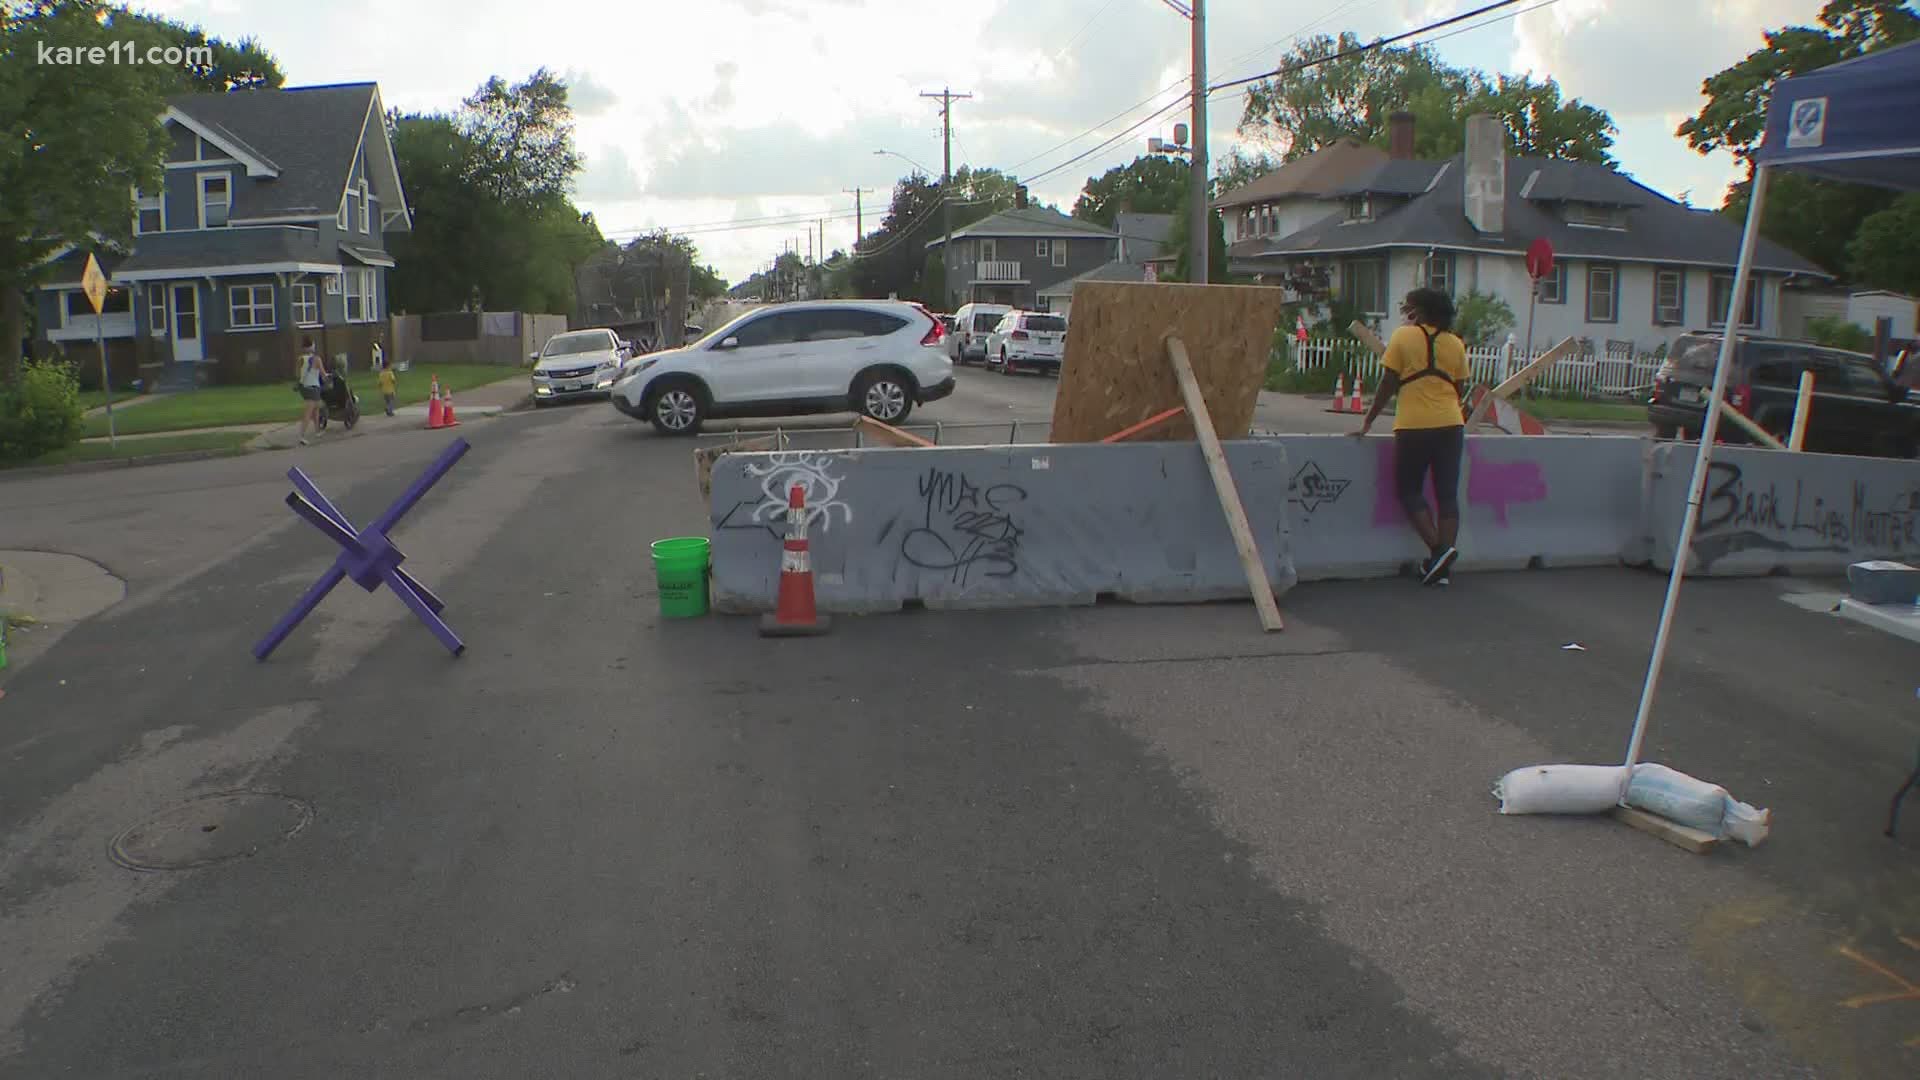 People living in South Minneapolis say they've been seeing an increase in crime this summer.